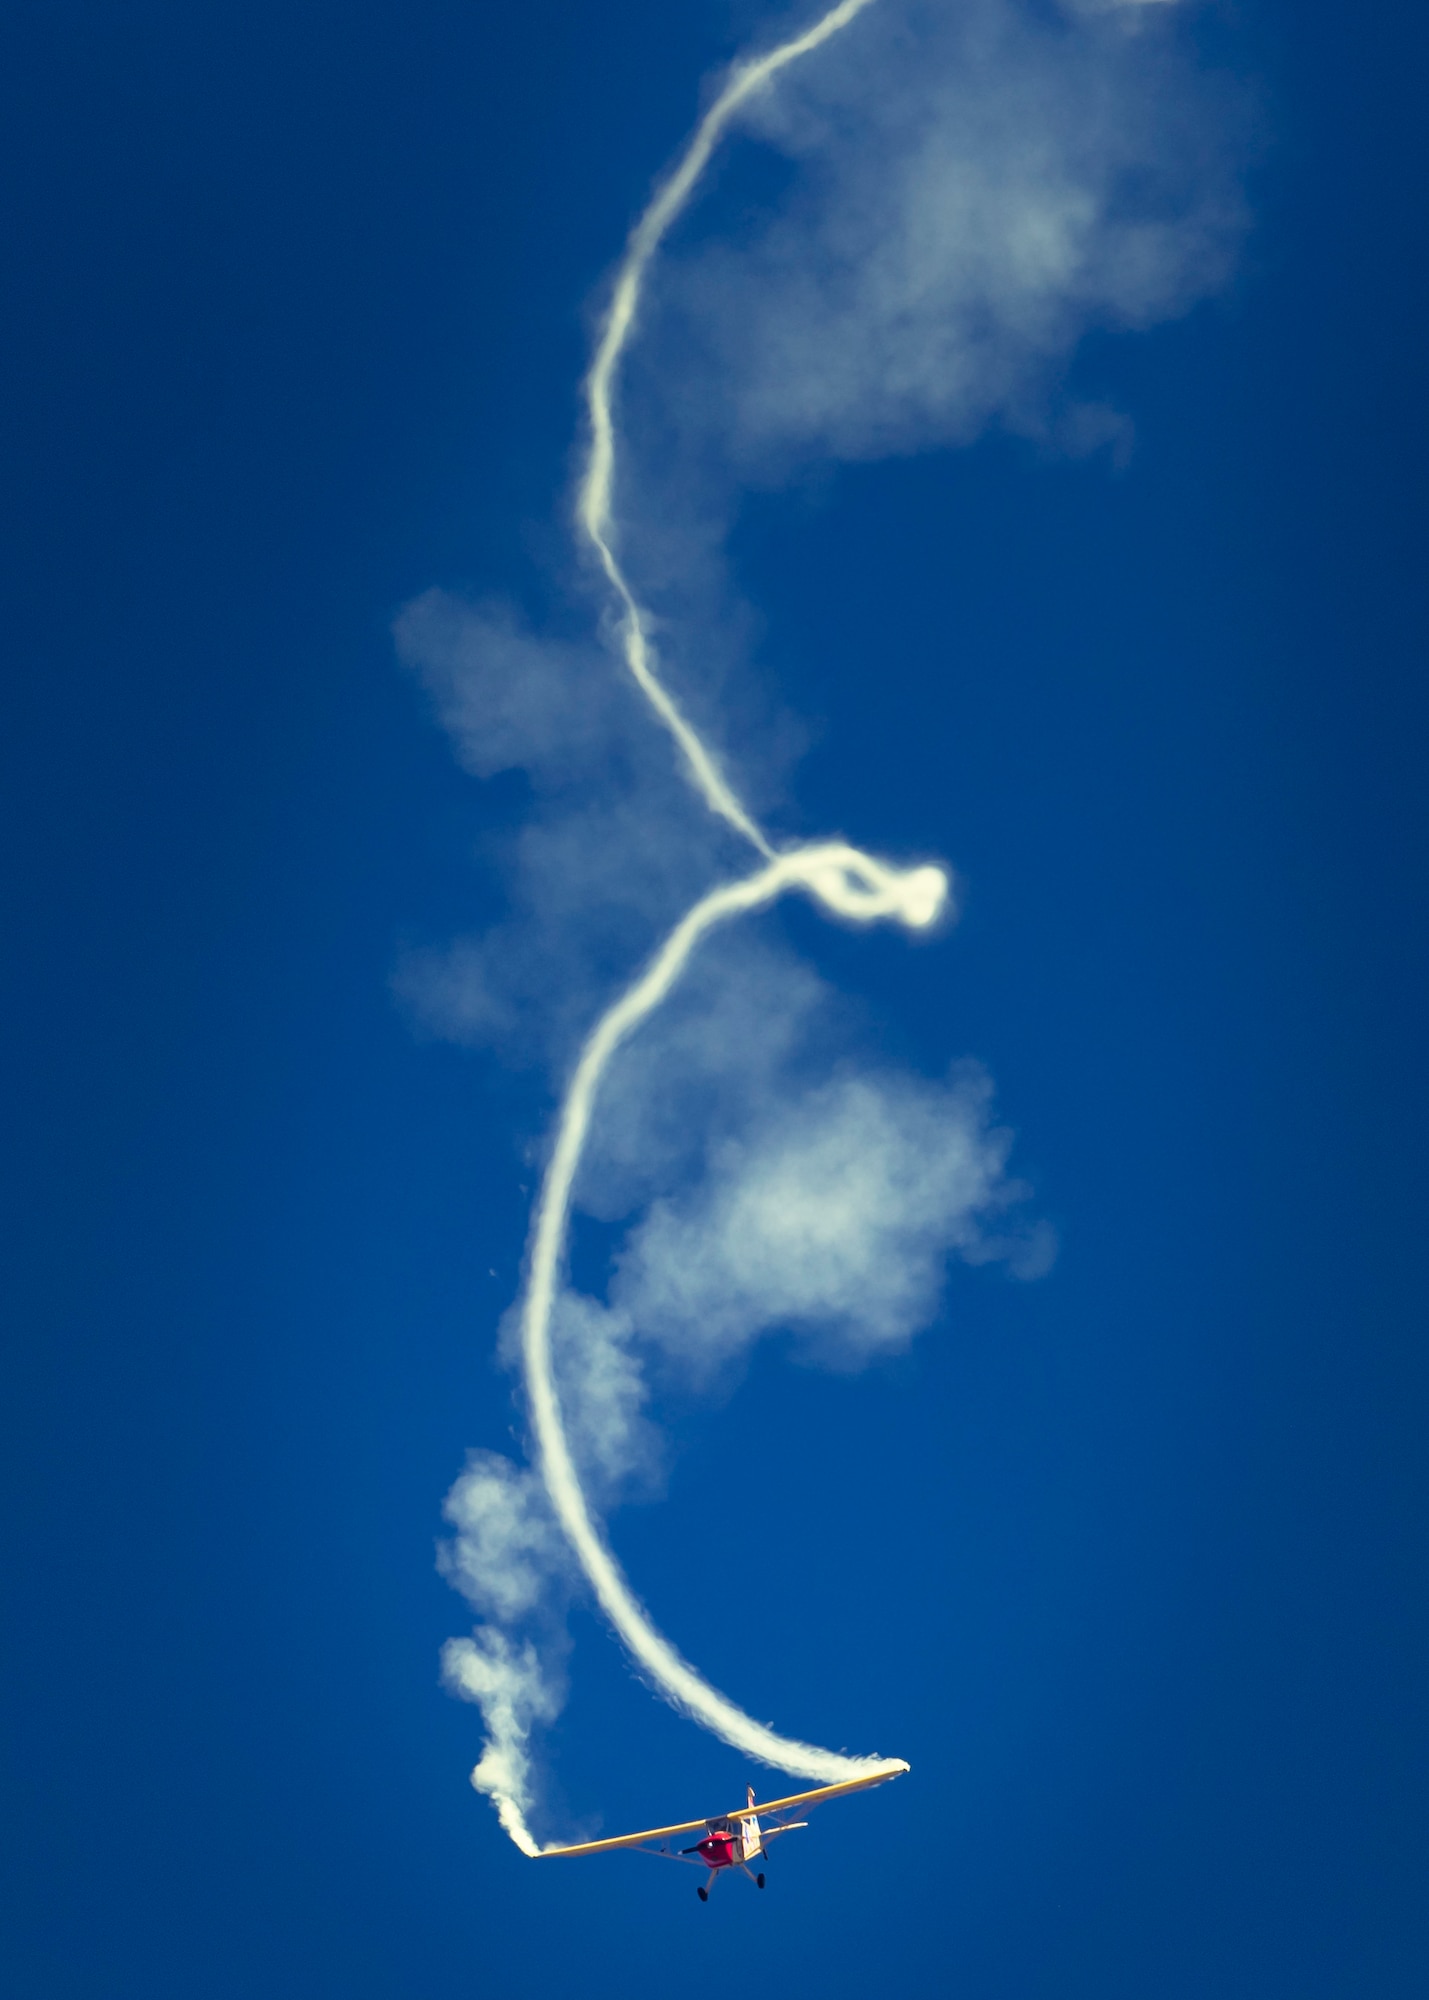 The Jelly Belly Comedy Air Act performs at the Sheppard Air Force Base Guardians of Freedom Open House and Air Show at Sheppard AFB, Texas, Oct. 26, 2019. Equal parts aviator, educator and comedian of the skies, Kent Pietsch performs the unique variety of acts with his Jelly Belly airplanes. His shows include aerobatic stunts featuring airplanes that lose parts, engines that quit in mid-flight and landings onto runways mounted on moving vehicles. (U.S. Air Force photo by Airman 1st Class Pedro Tenorio)